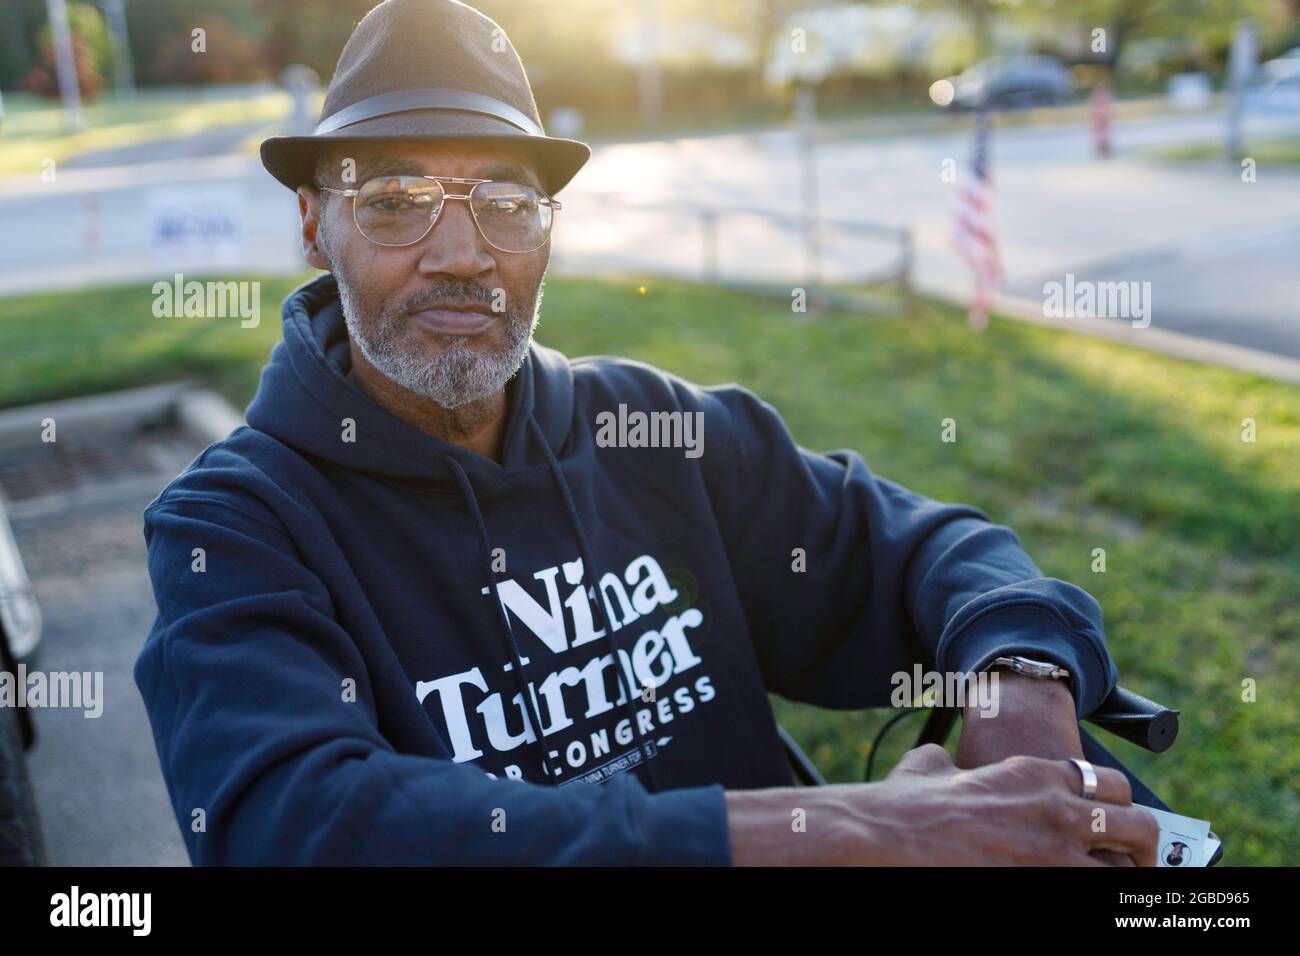 Erwin Johnson, 61, of Cleveland, Ohio sits for a portrait outside of the Warrensville Heights Recreation Center while a car with a Shontel Brown sticker drives by. Johnson came to show support for Nina Turner because, “I think she's the best candidate. She's been a state rep, She's the most qualified.” Voters came out to the polls for a special election in Ohio's 11th district. The two main leading candidates for this House of Representatives seat are two Democrats, Nina Turner, a progressive candidate, and Shontel Brown, who represents the traditional Democratic establishment. Stock Photo